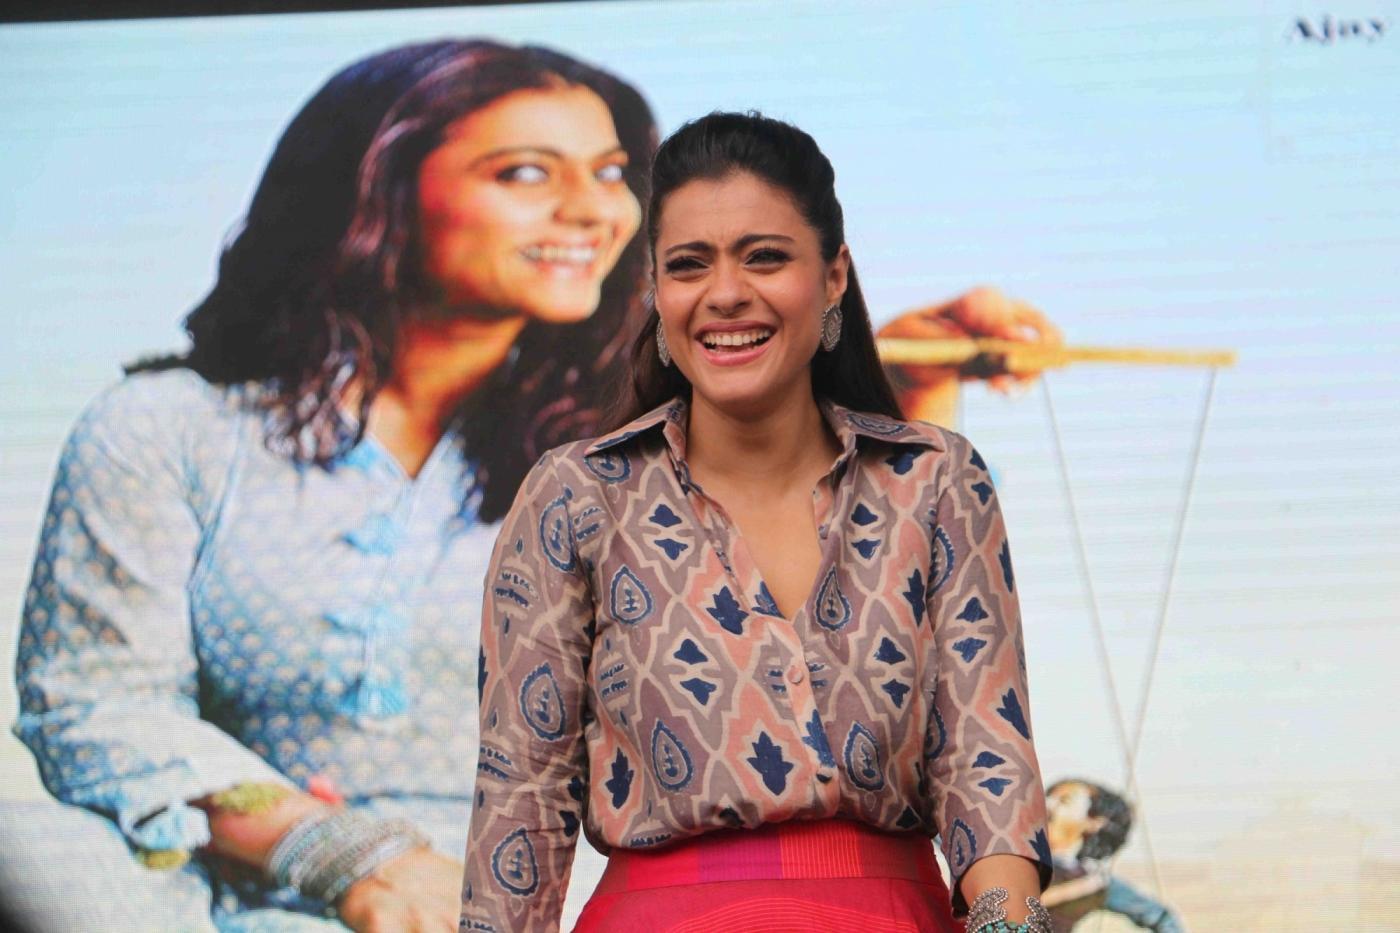 Mumbai: Actress Kajol Devgn during the promotion of her upcoming film "Helicopter Eela" at Umang Festival in Mumbai on Aug 20, 2018.(Photo: IANS) by .